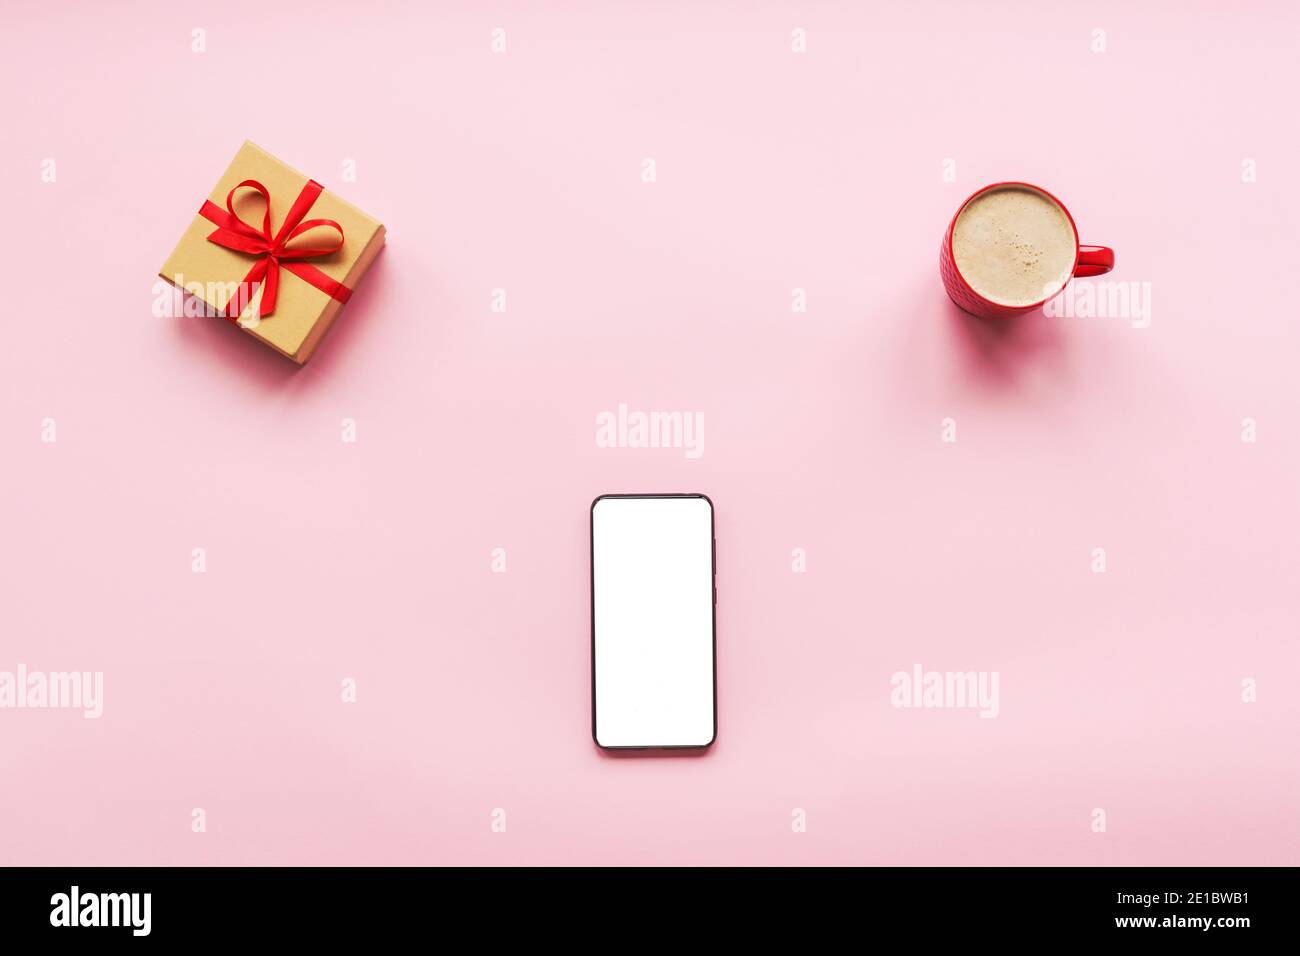 Cup of cappuccino, gift in a box and mobile phone with blank screen on a pink background. Love concept, Valentines day. Top view, flat lay. Stock Photo